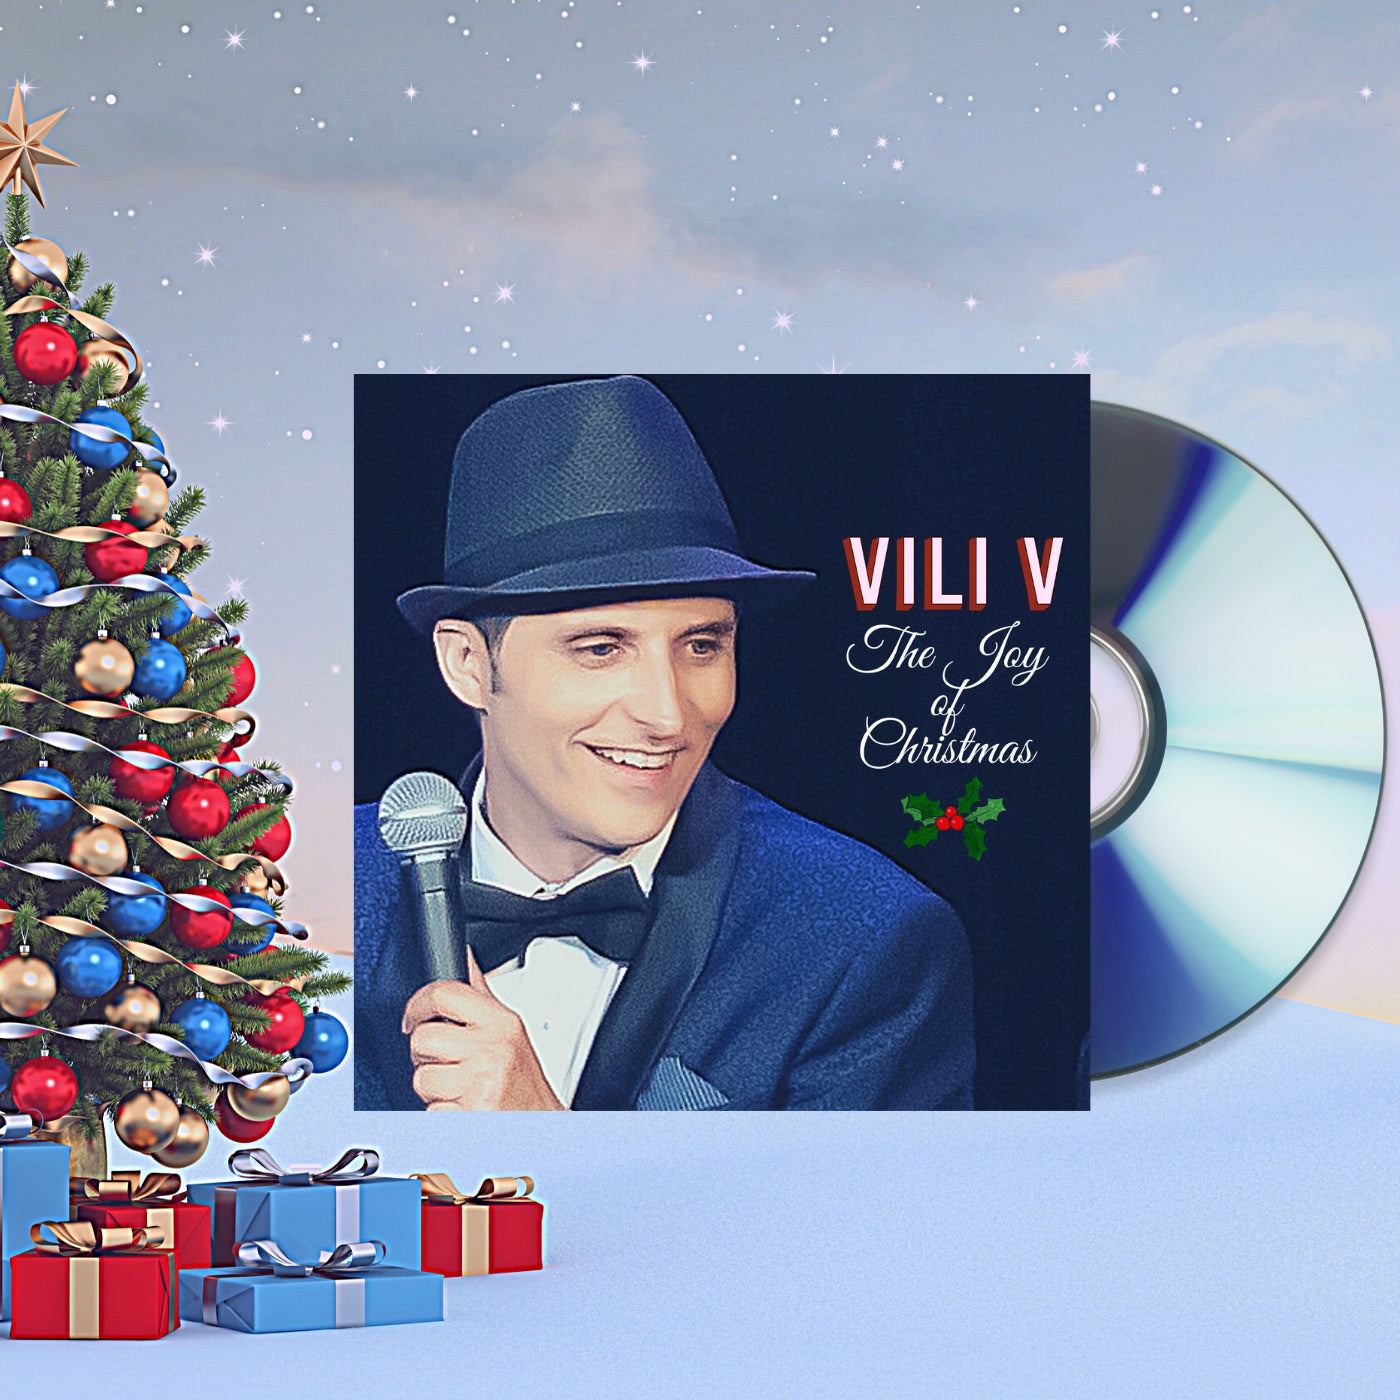 The Joy of Christmas (Deluxe Single CD - Physical)